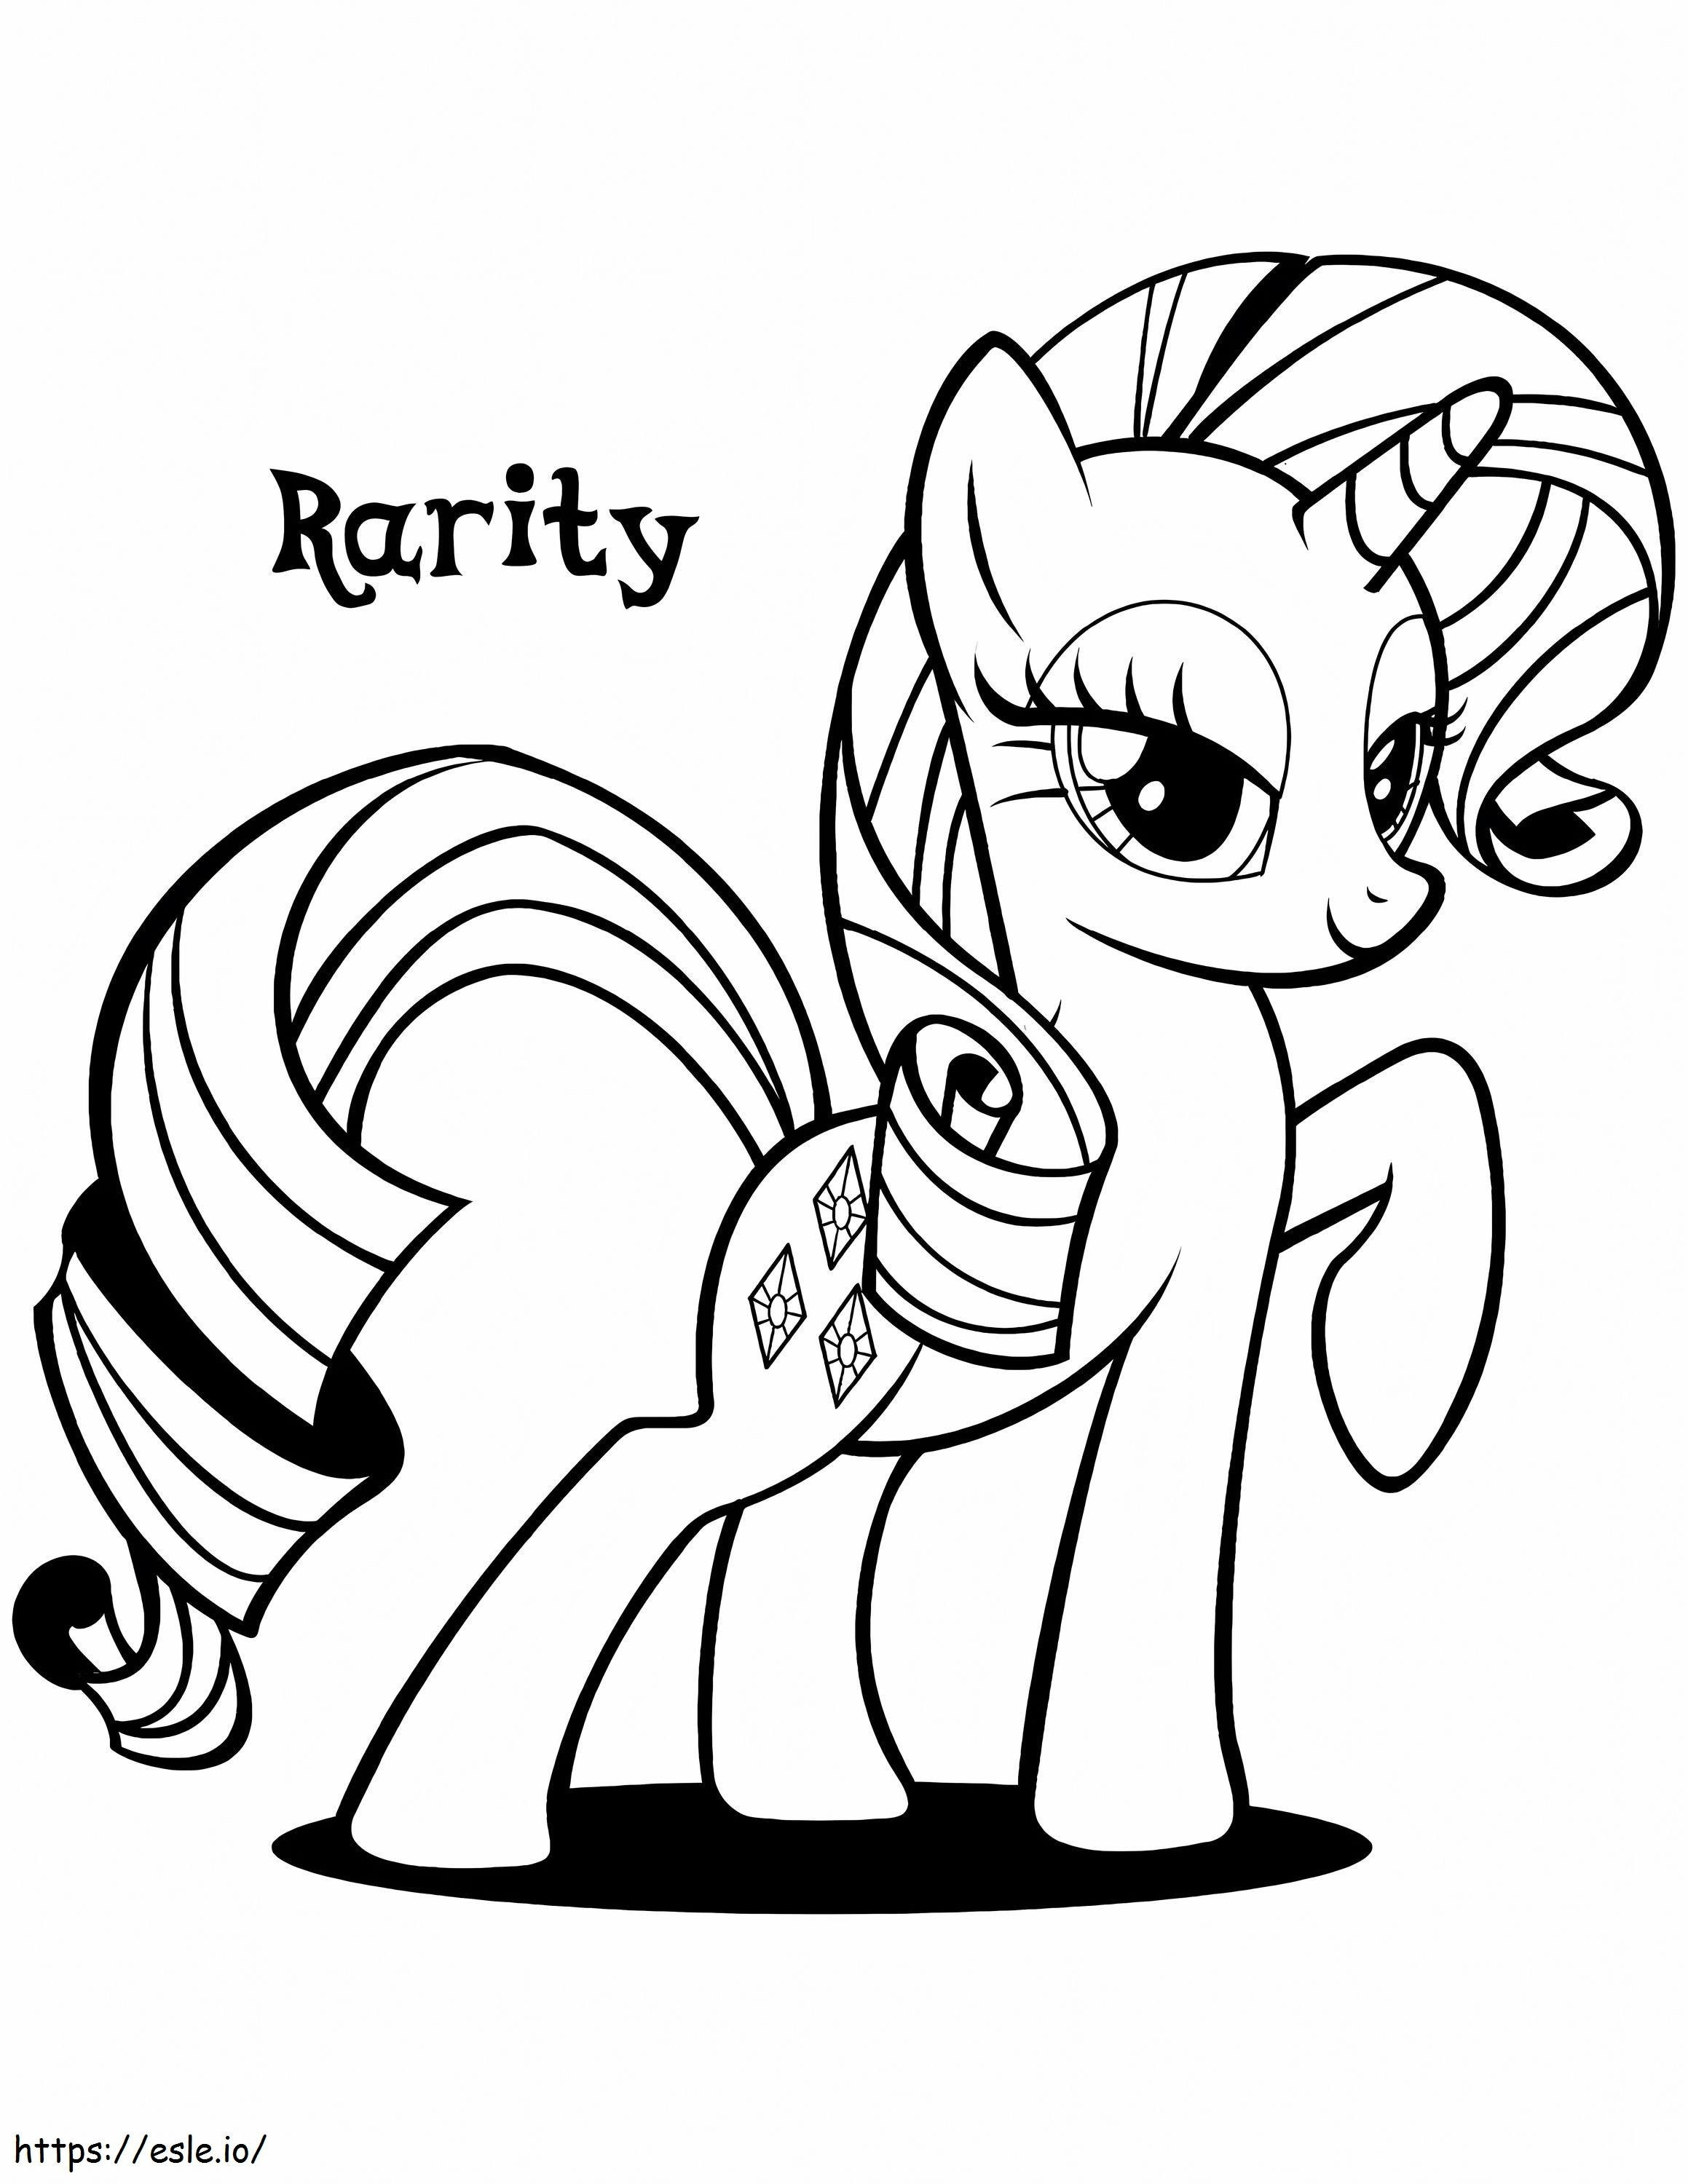 1545874652 My Little Pony Applejack 1010 coloring page